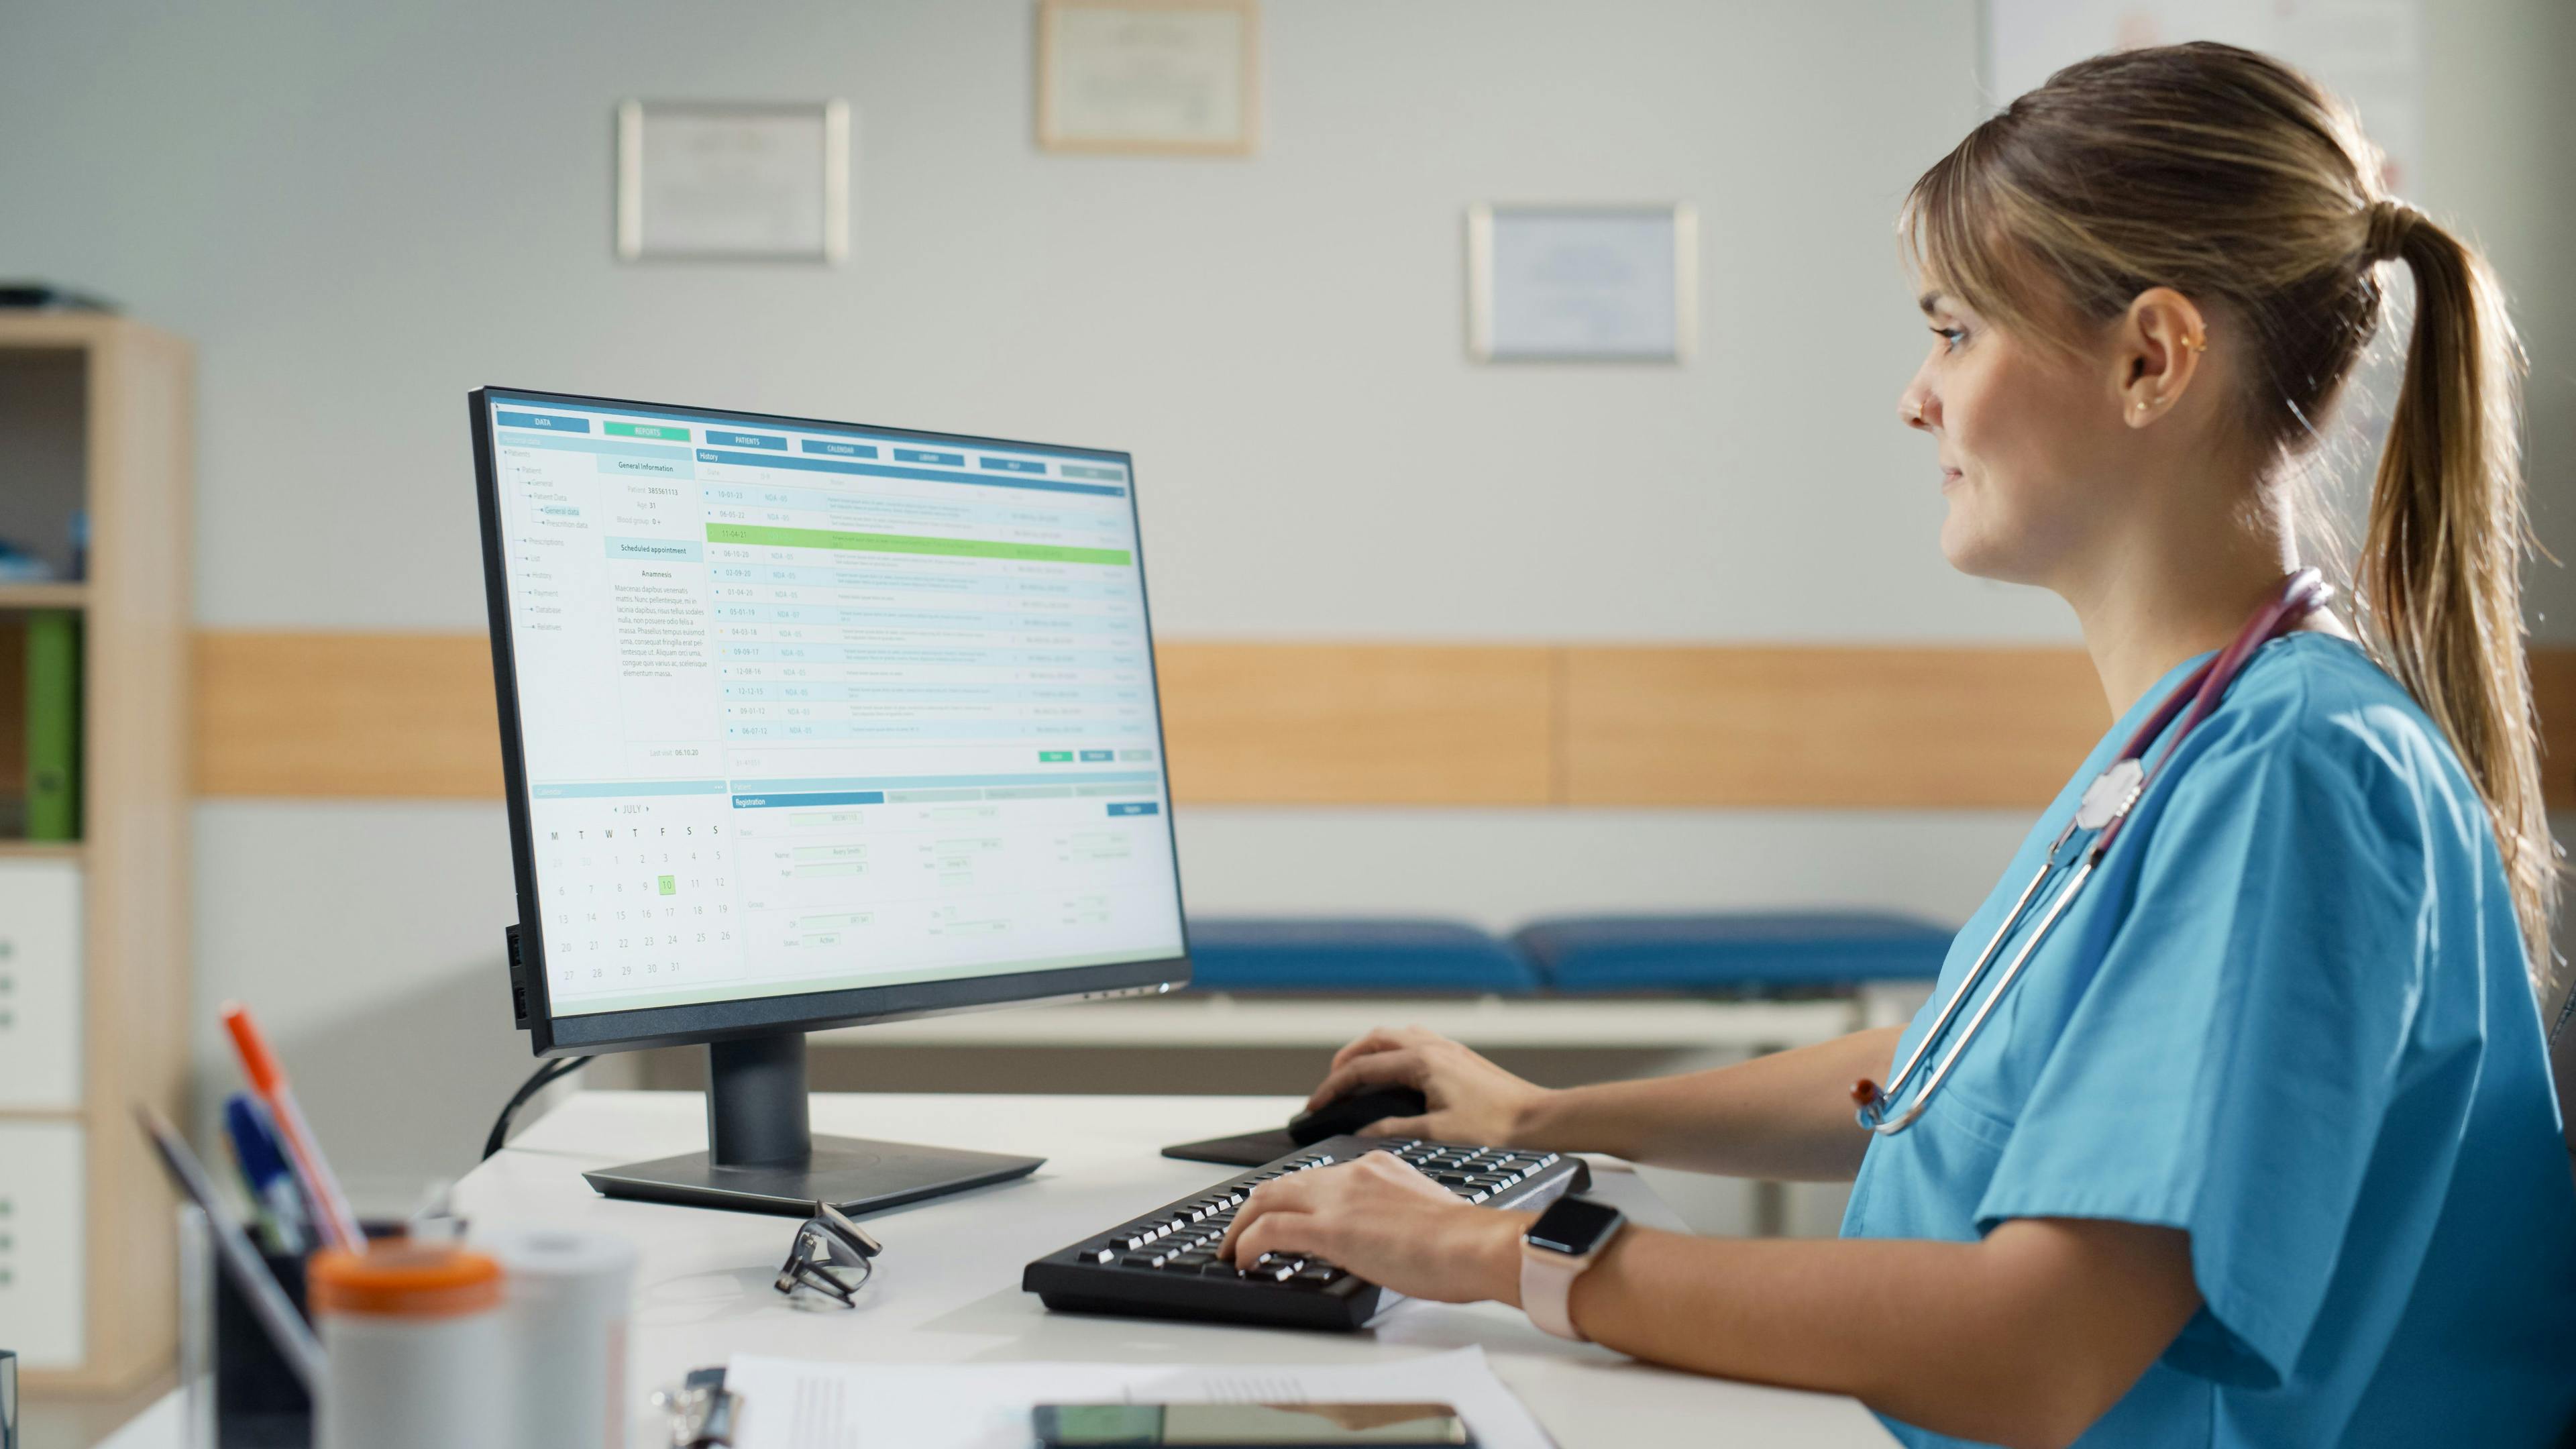 IT systems need to better align with physician needs: ©Gorodenkoff - stock.adobe.com